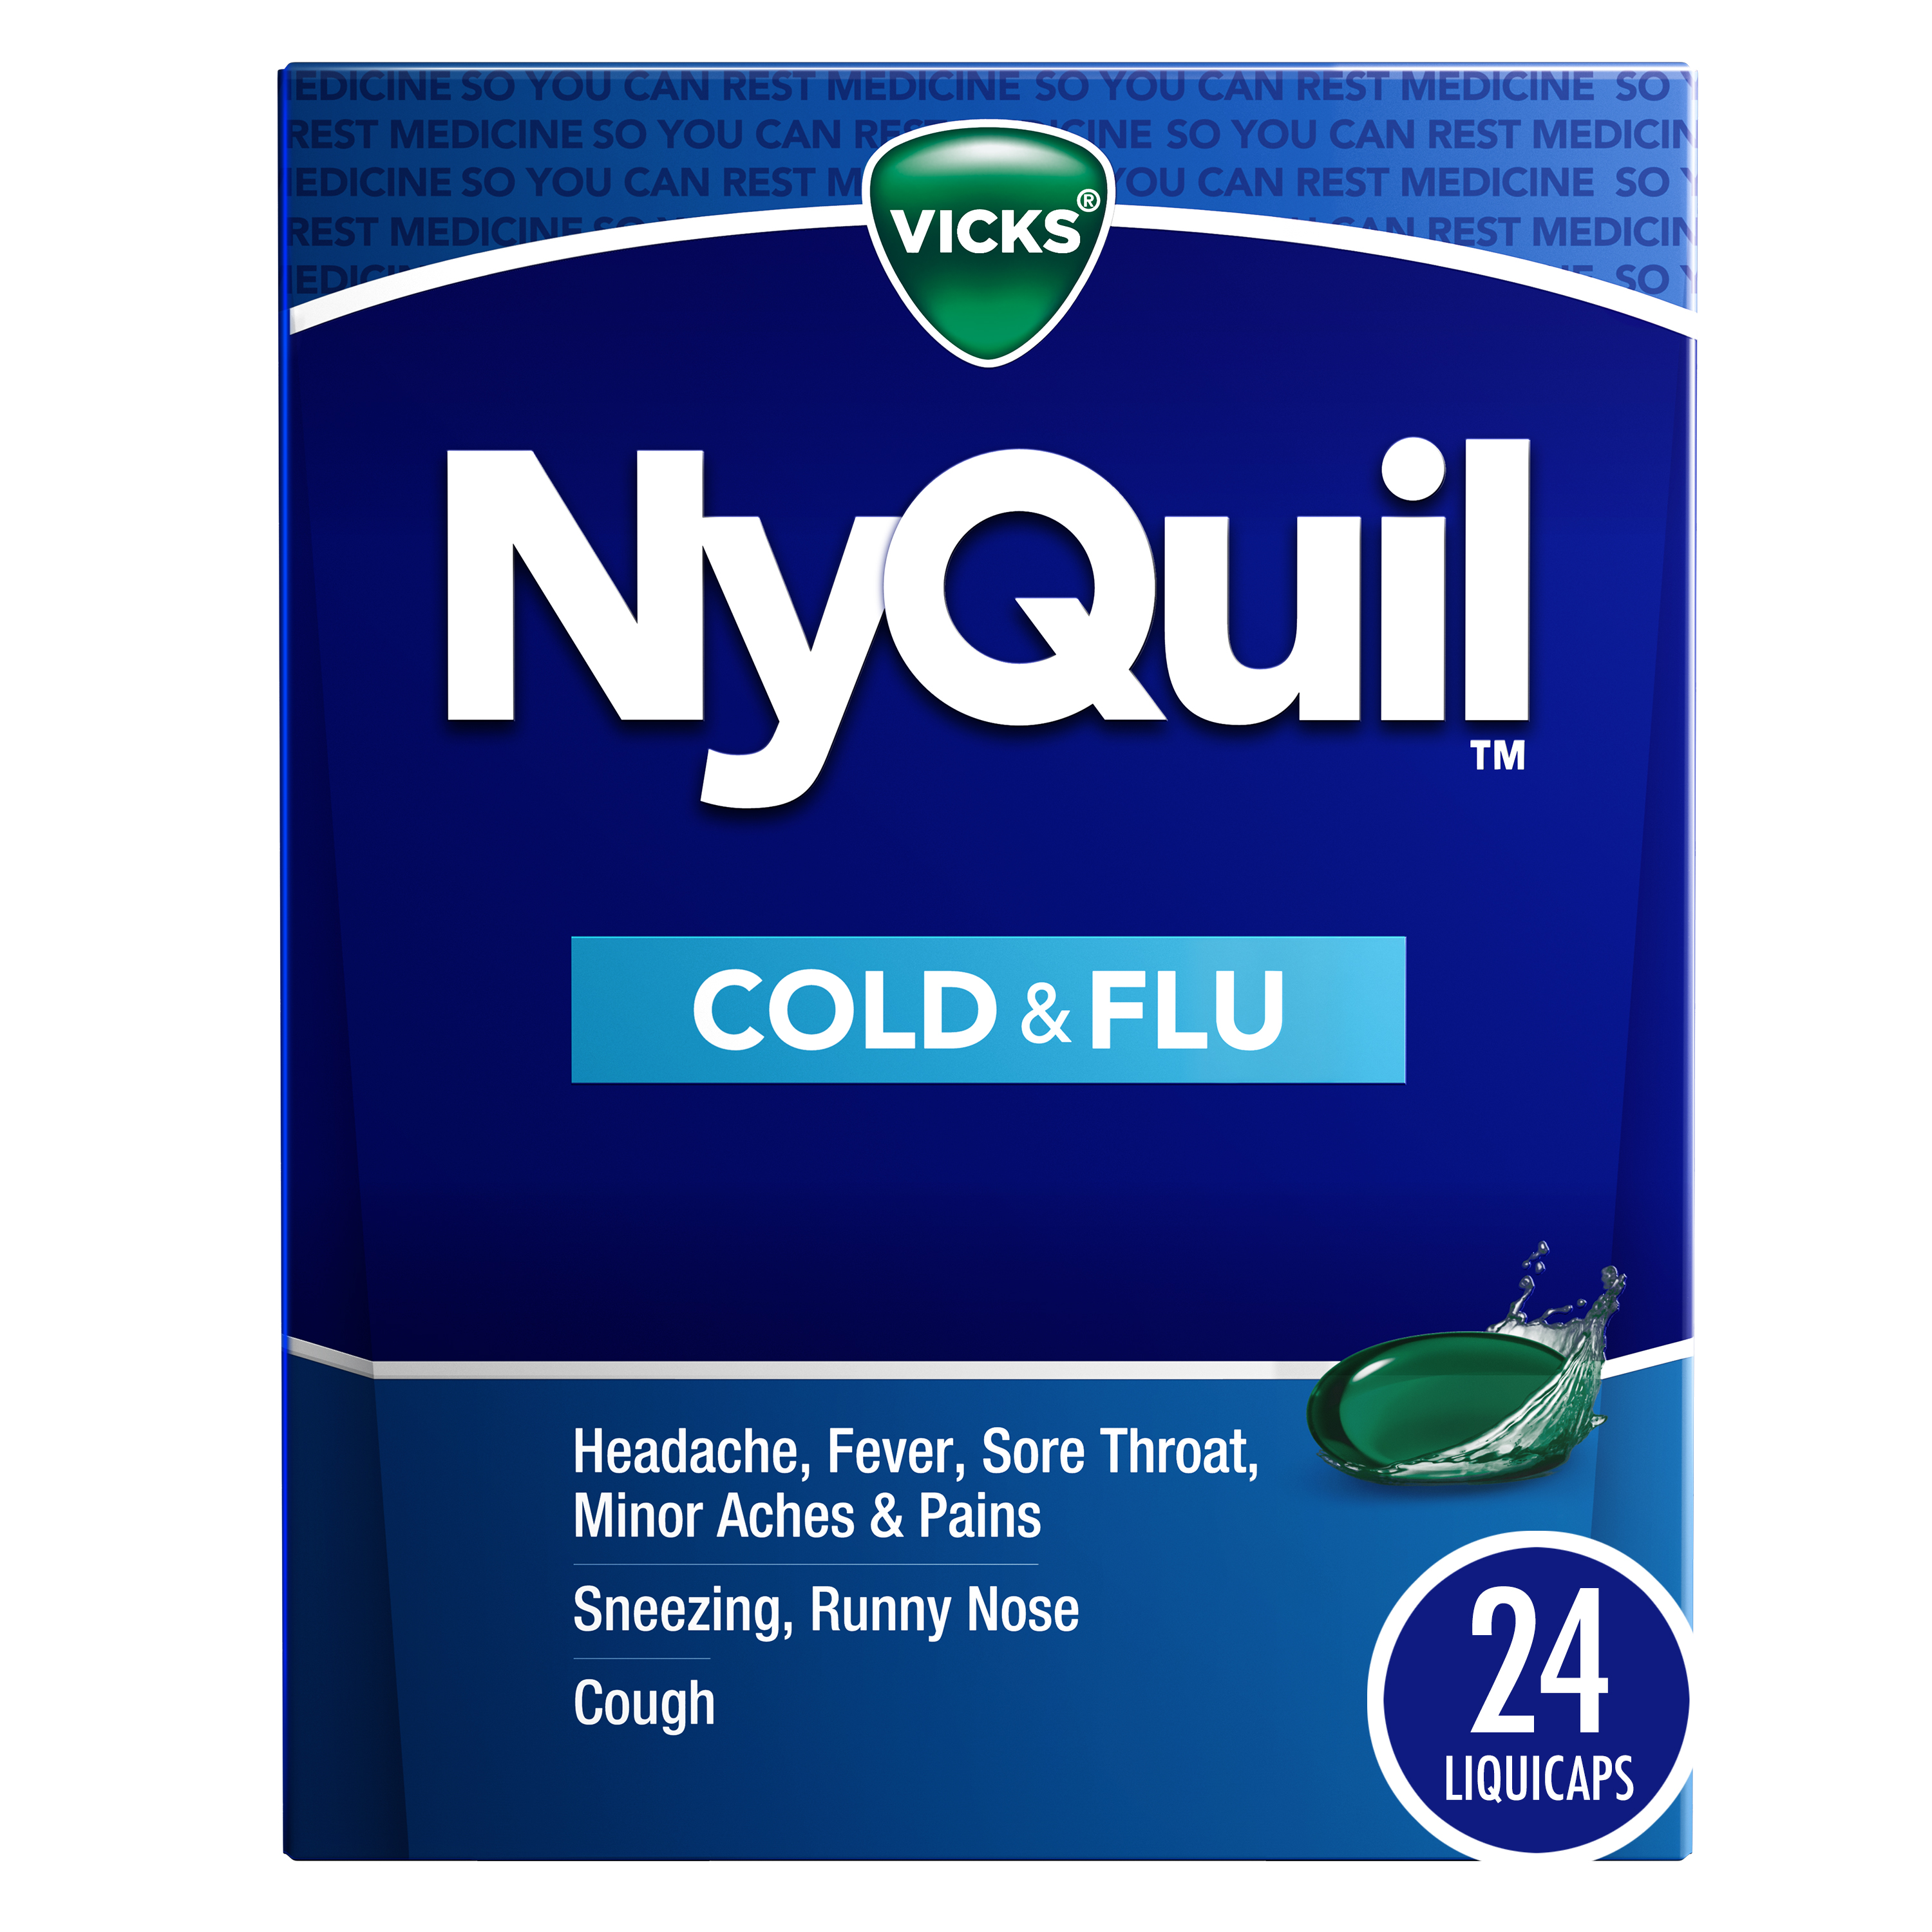 Vicks NyQuil Liquicaps, Nighttime Cold, Cough & Flu Medicine, Over-the-Counter Medicine, 24 Ct - image 1 of 8